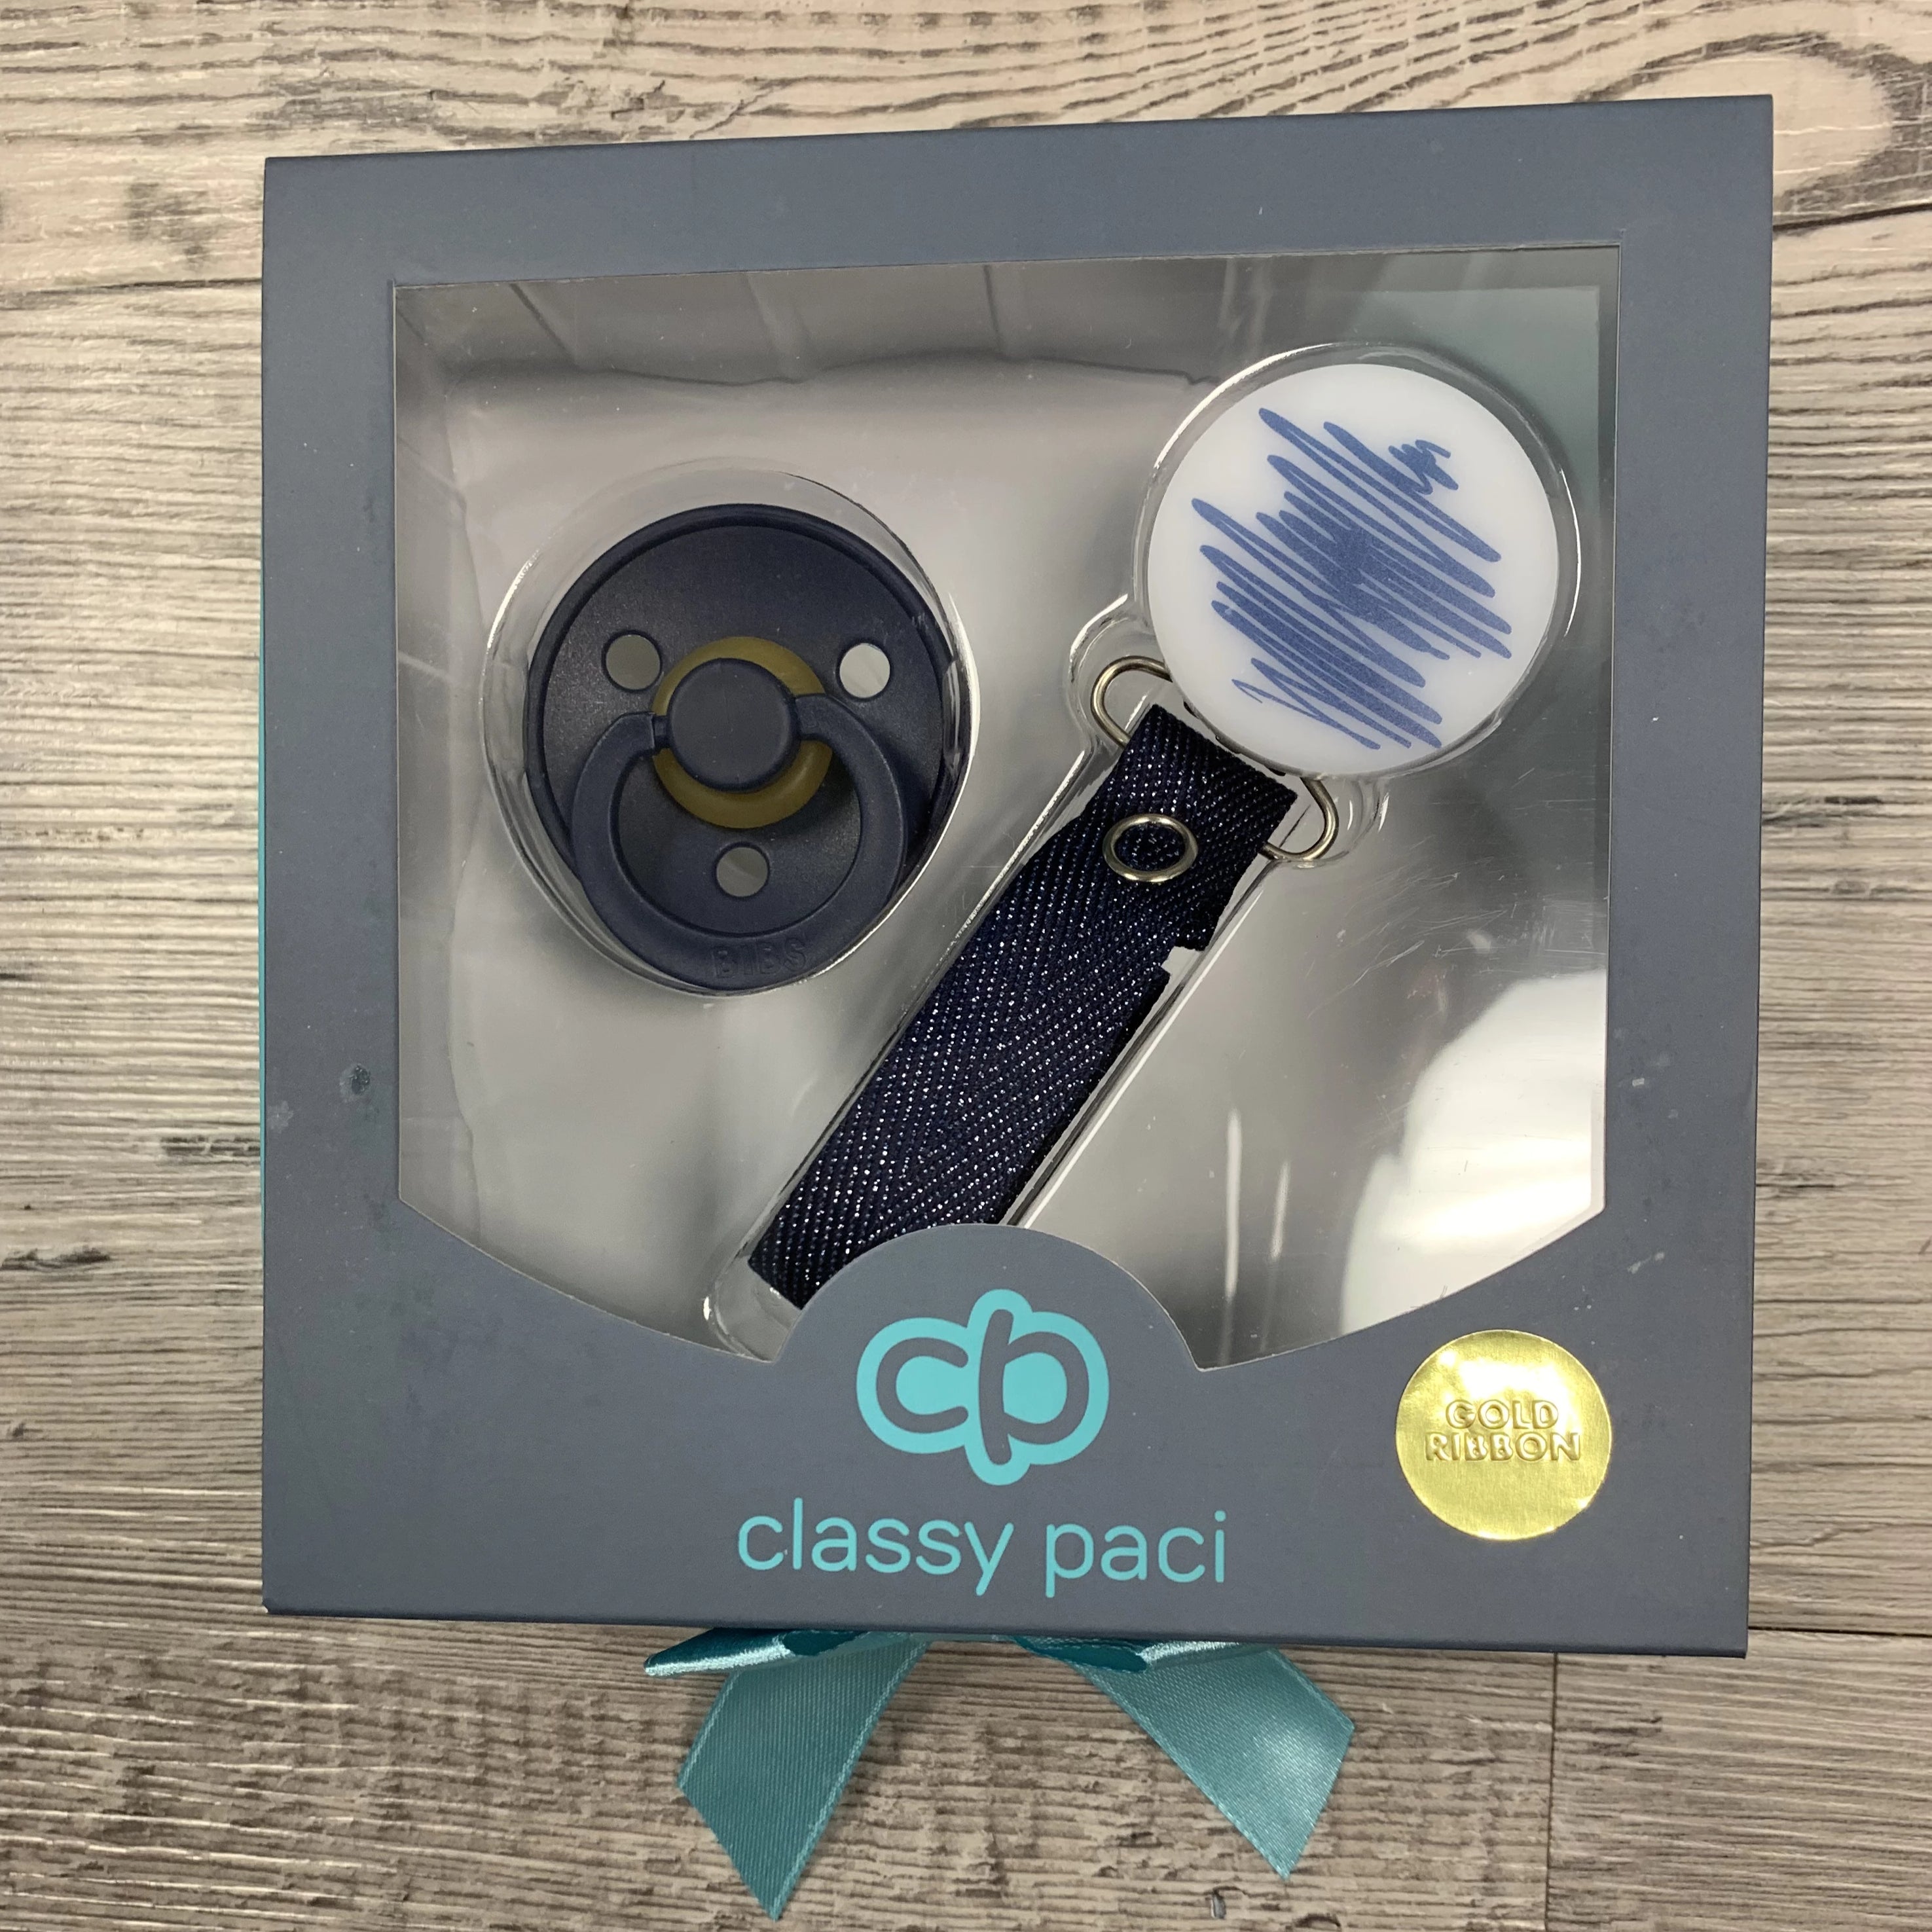 Classy Paci DOODLE blue denim round pacifier clip with Bibs blue pacifier GIFT SET